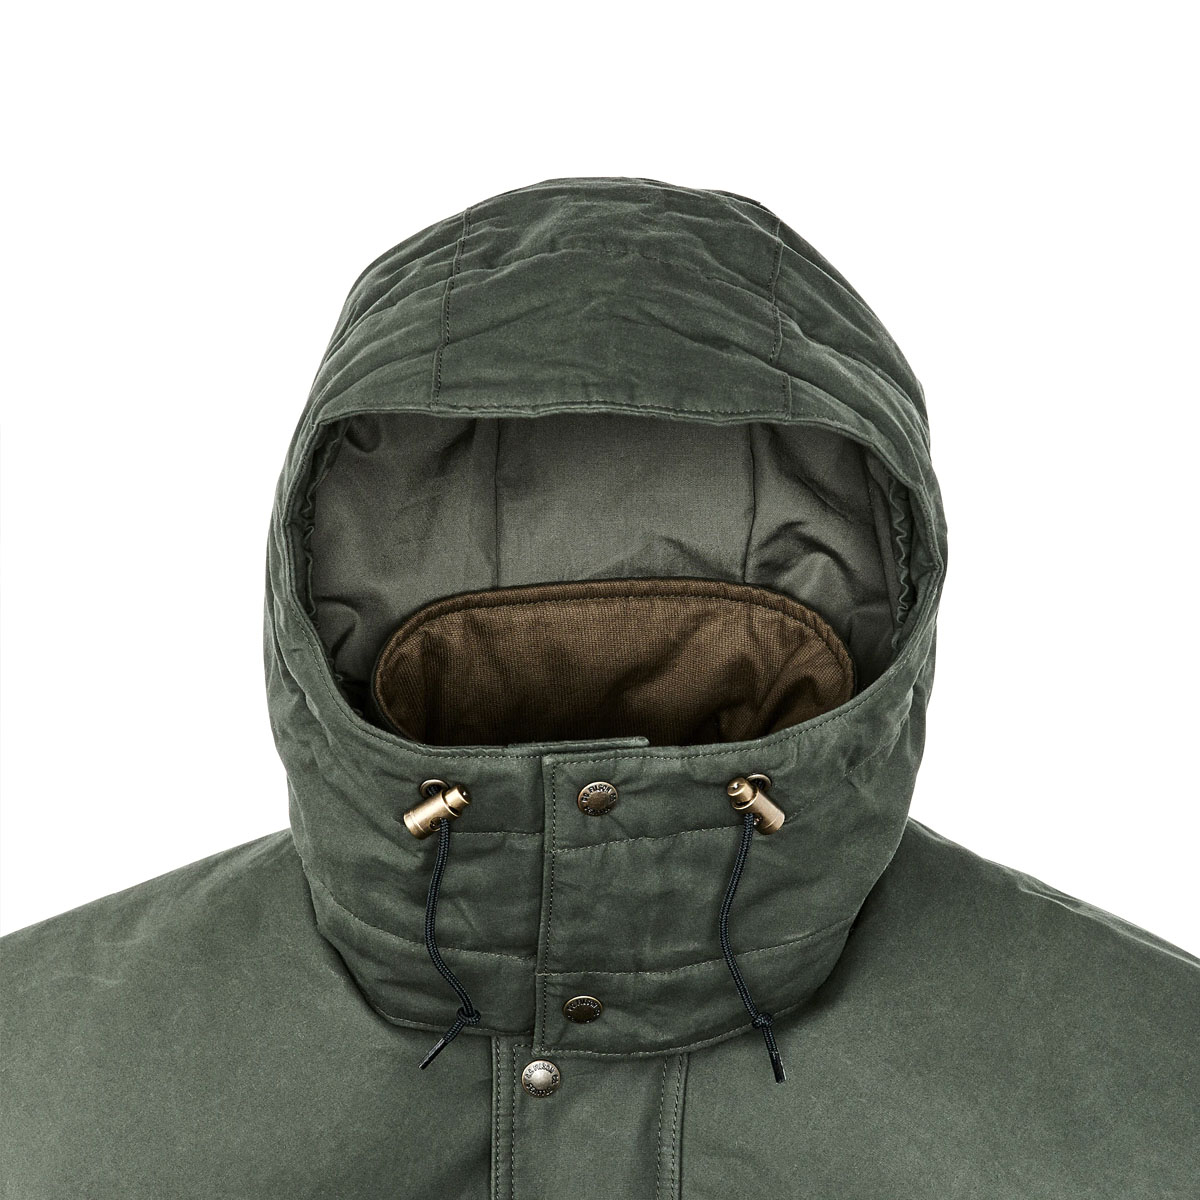 Filson Ranger Insulated Field Jacket, Removable-hood-insulated-with-60g-PrimaLoft-Gold